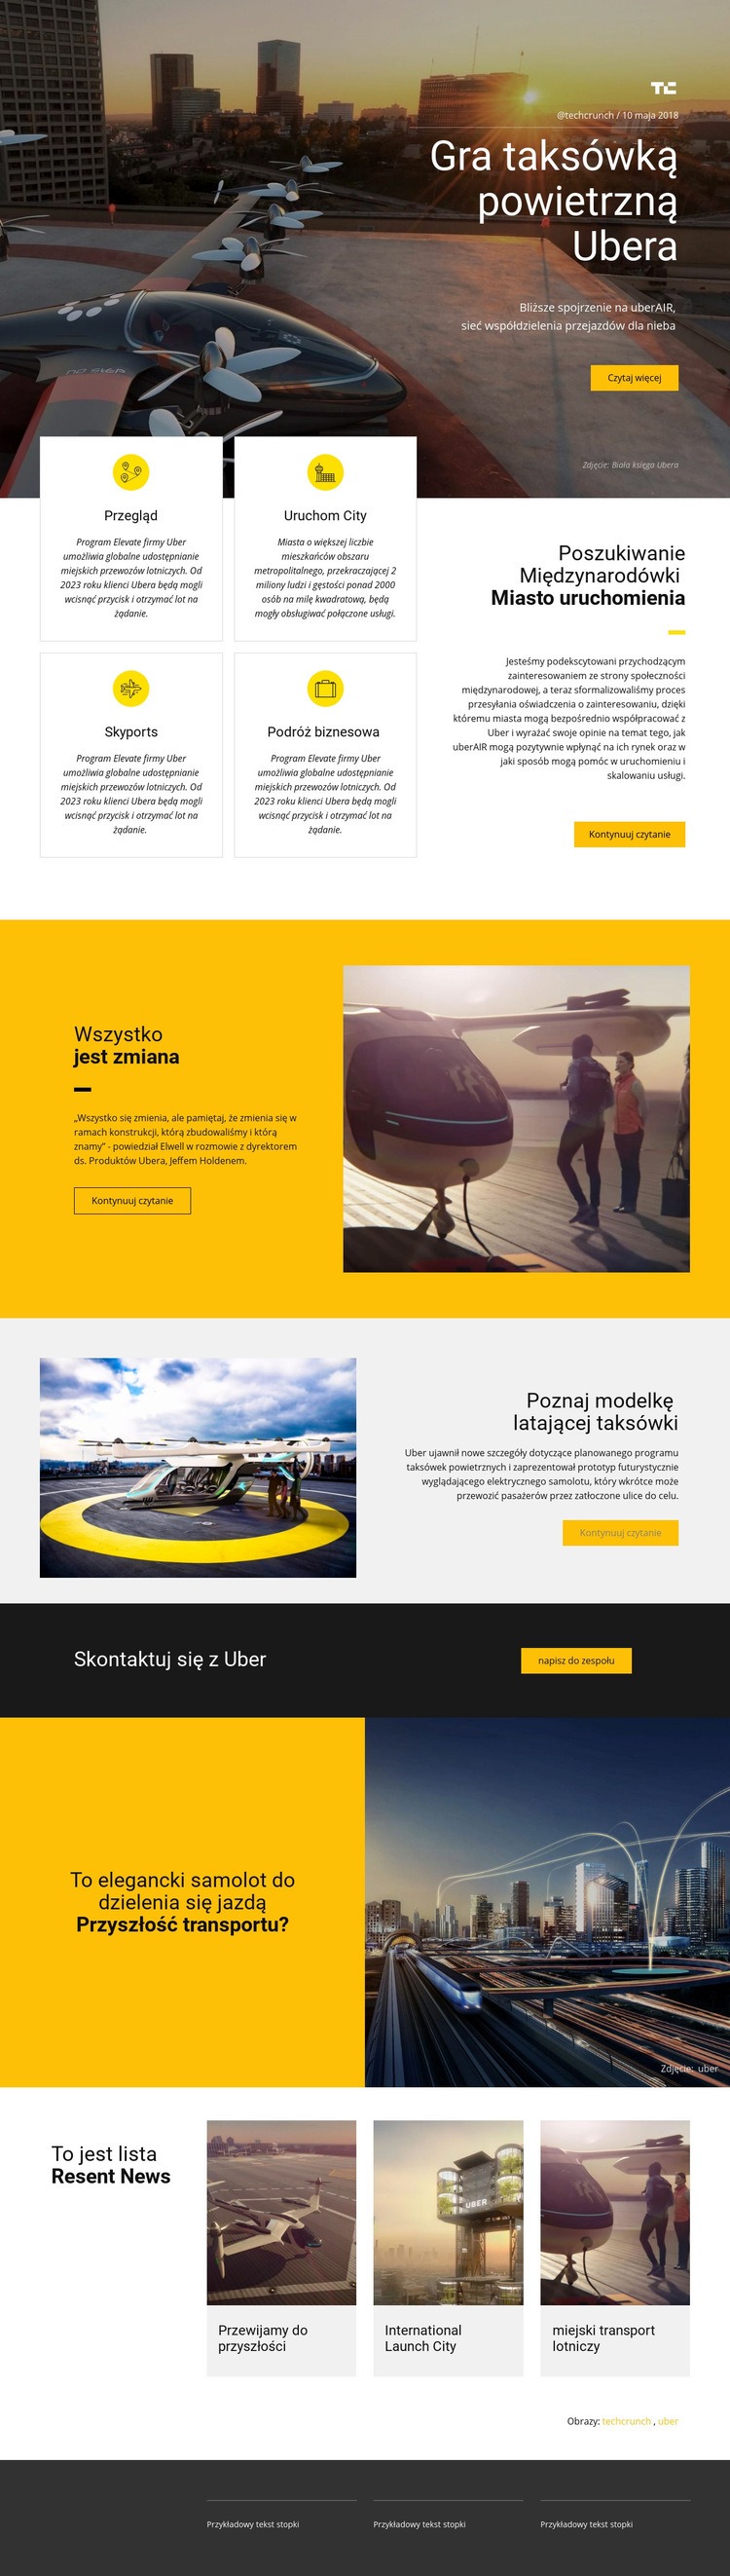 Uber's Aerial Taxi Play Szablon HTML5